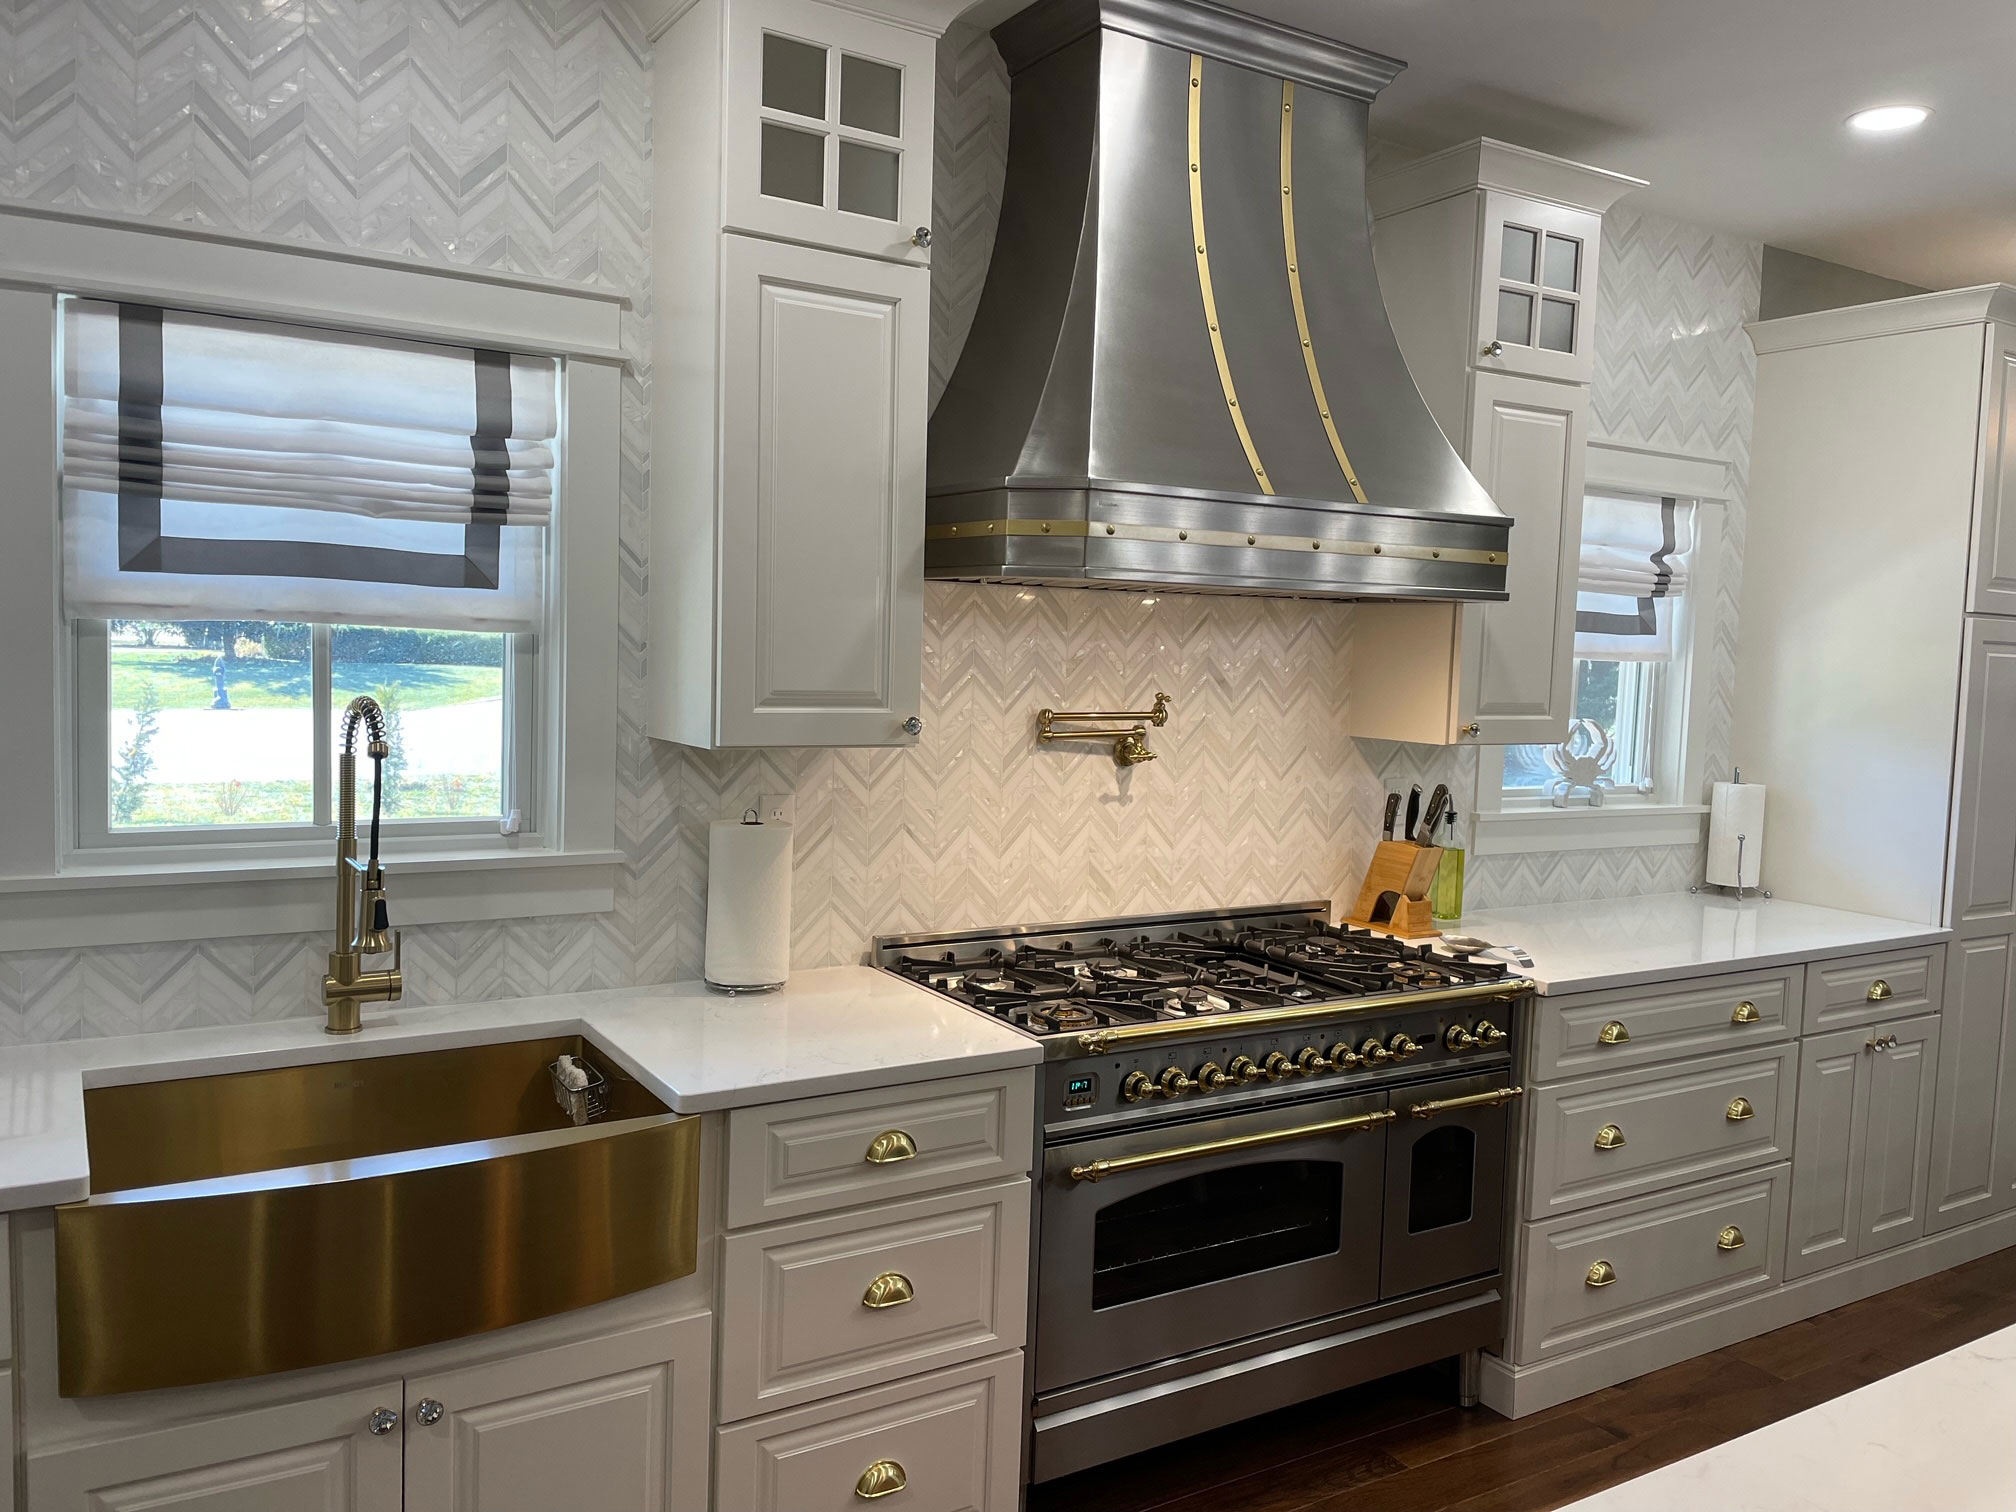 Trending contemporary kitchen design idea with stylish range hood designs features grey kitchen cabinets white kitchen countertops and white tile backsplash